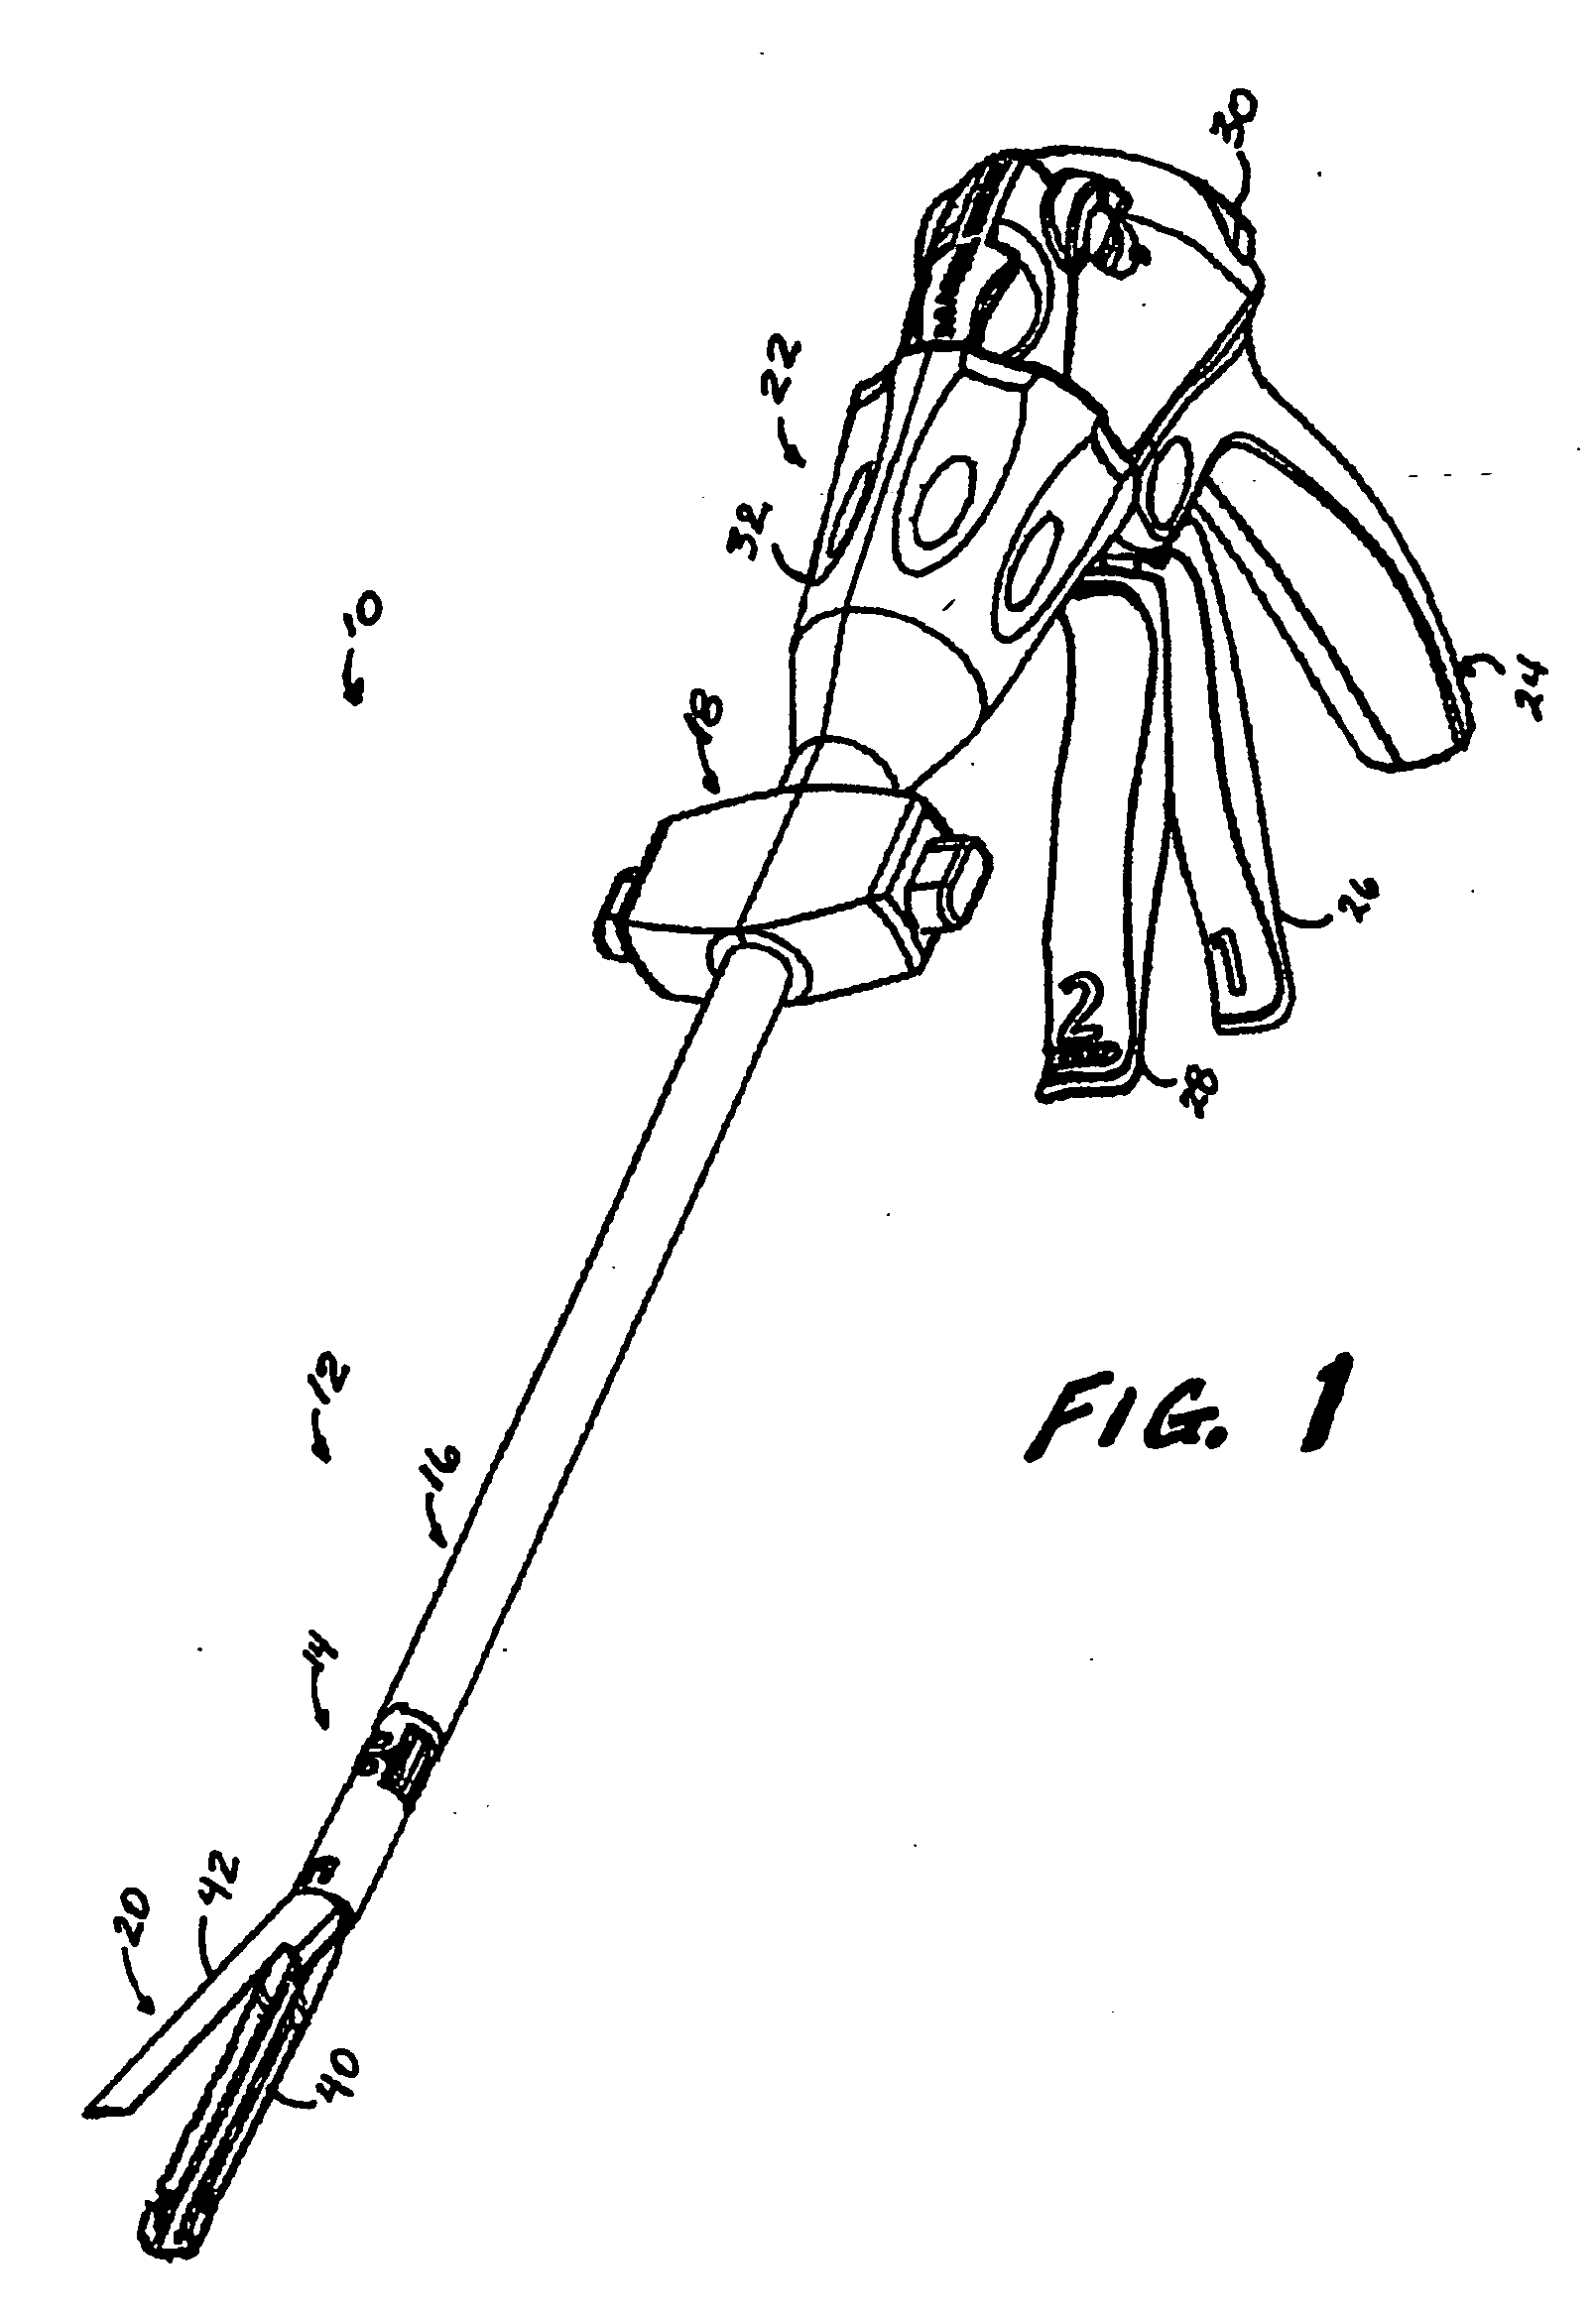 Surgical instrument with guided laterally moving articulation member